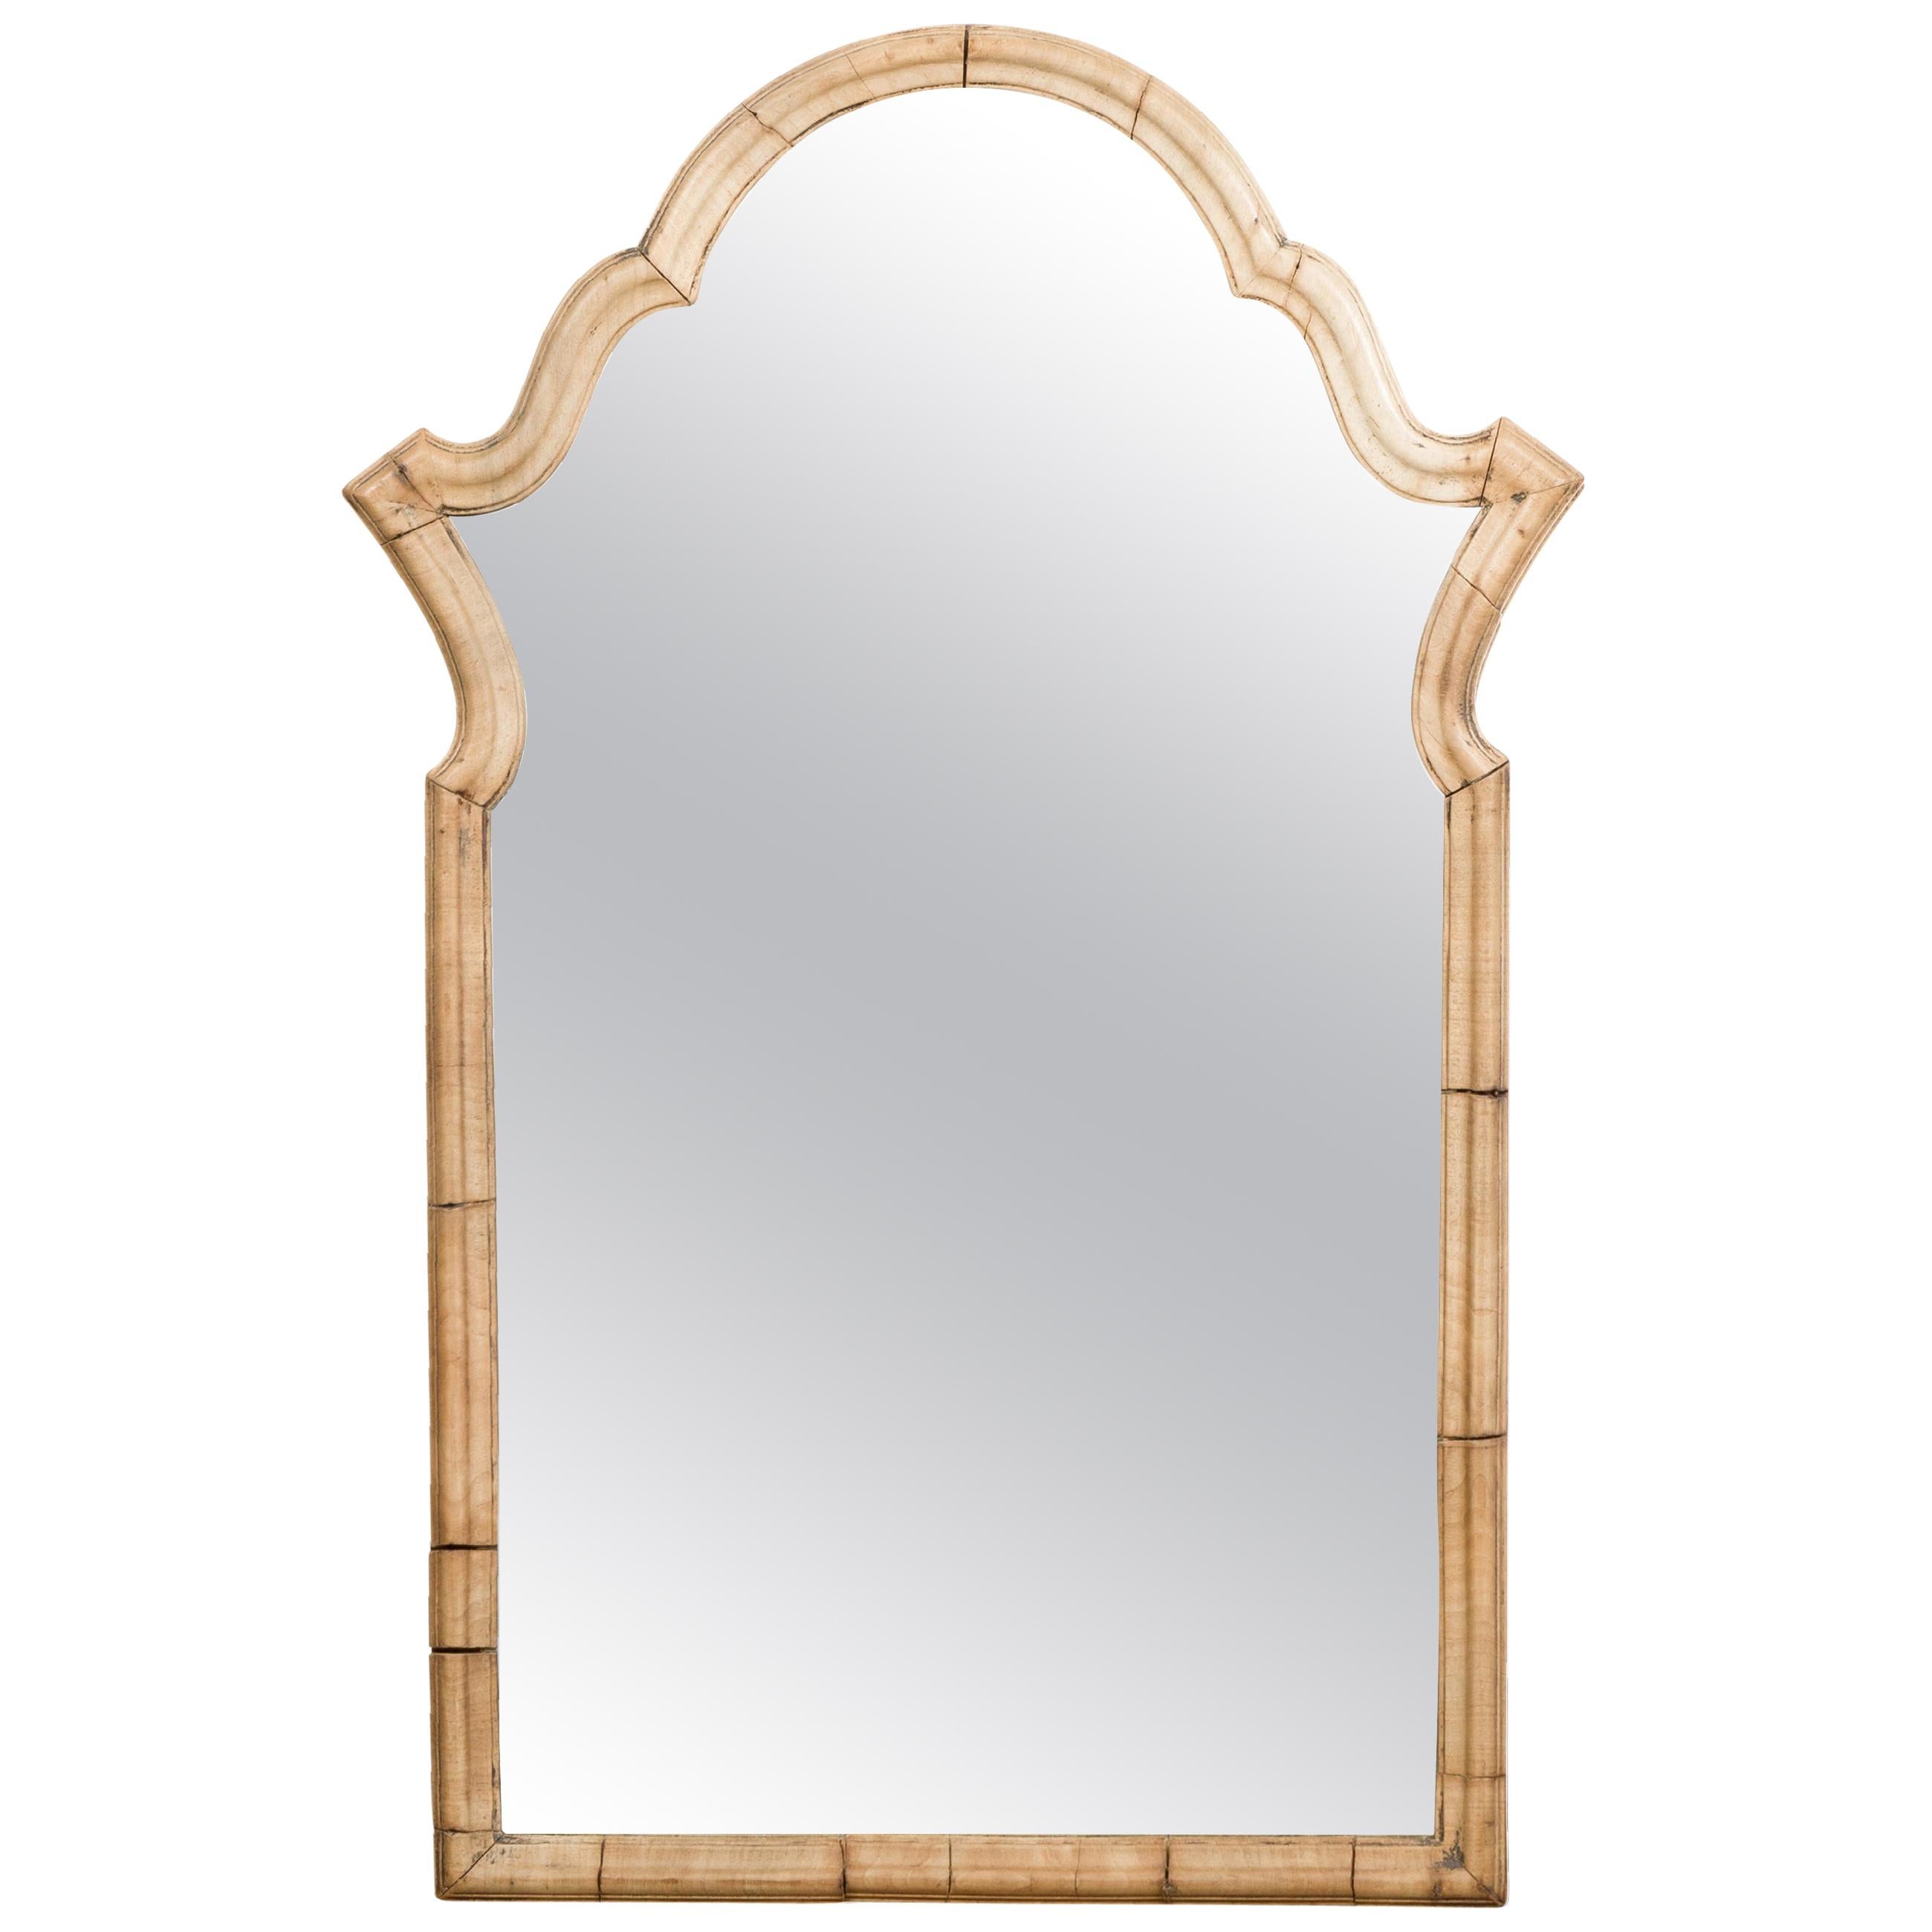 Petite Italian Walnut Mirror circa 1940 with Arched Top and Natural Patina